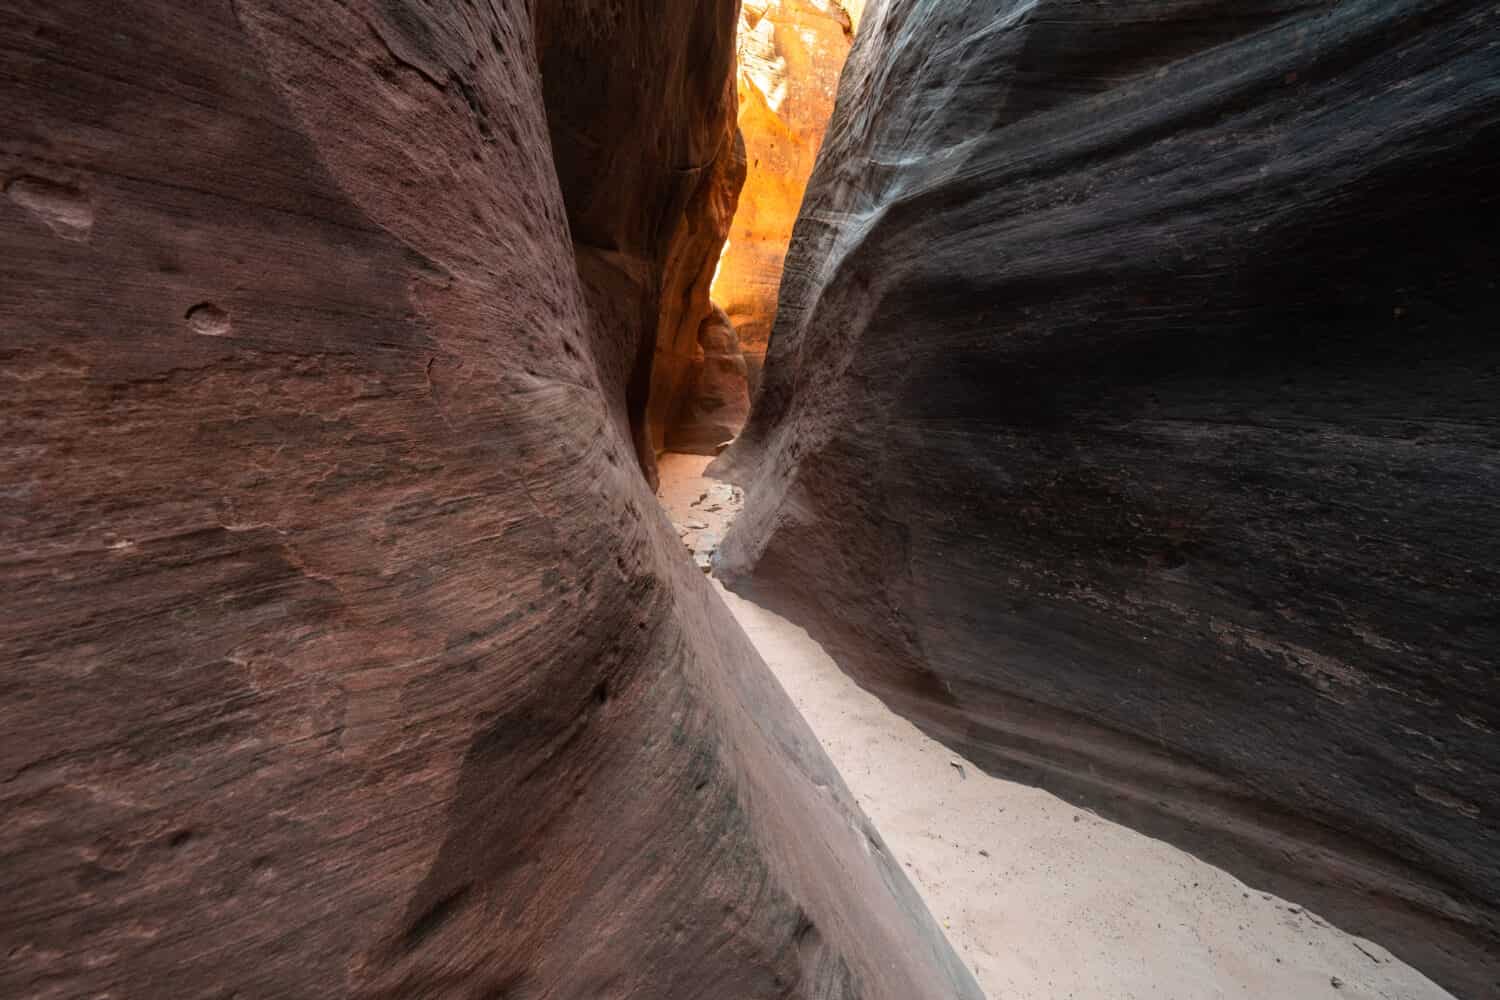 Glowing orange light from Red Hollow Canyon, Orderville, Utah, USA